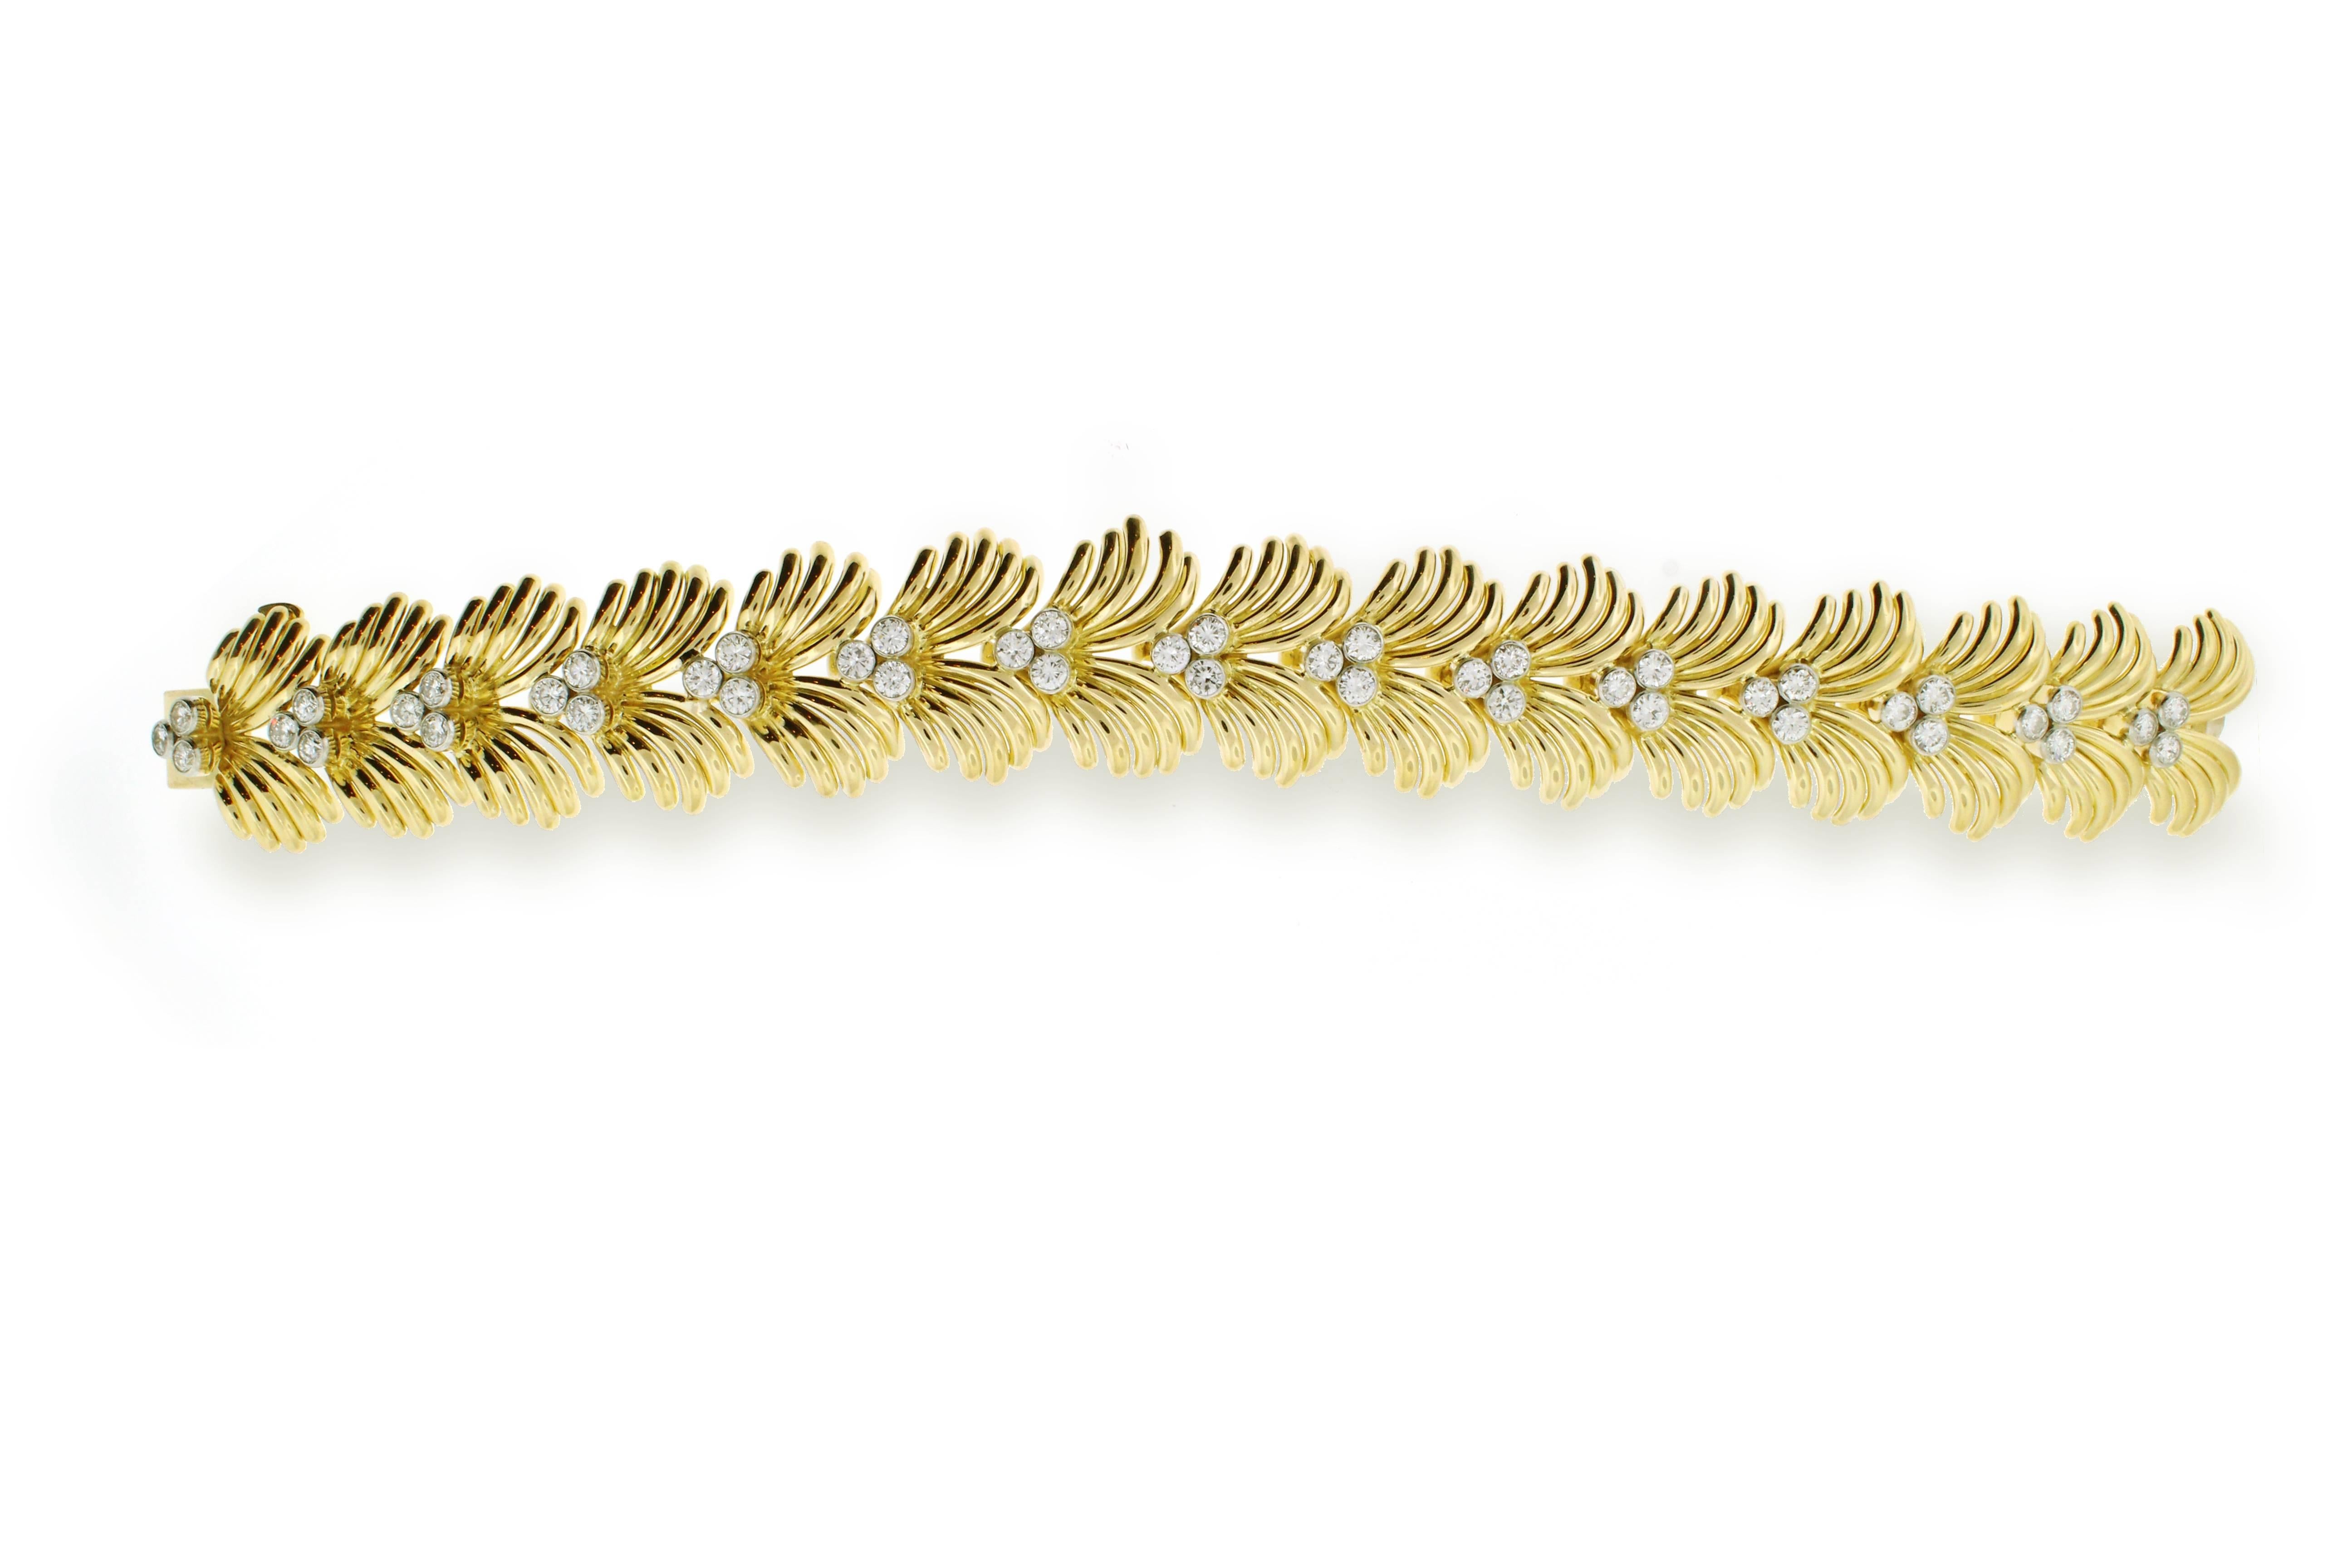 A dramatic diamond and gold bracelet from Van Cleef and Arpels. Comprised of 45 shimmering diamonds weighing  approximately 6 carats, the bracelet makes a statement day or night. Signed Van Cleef and Arpels, Made in France